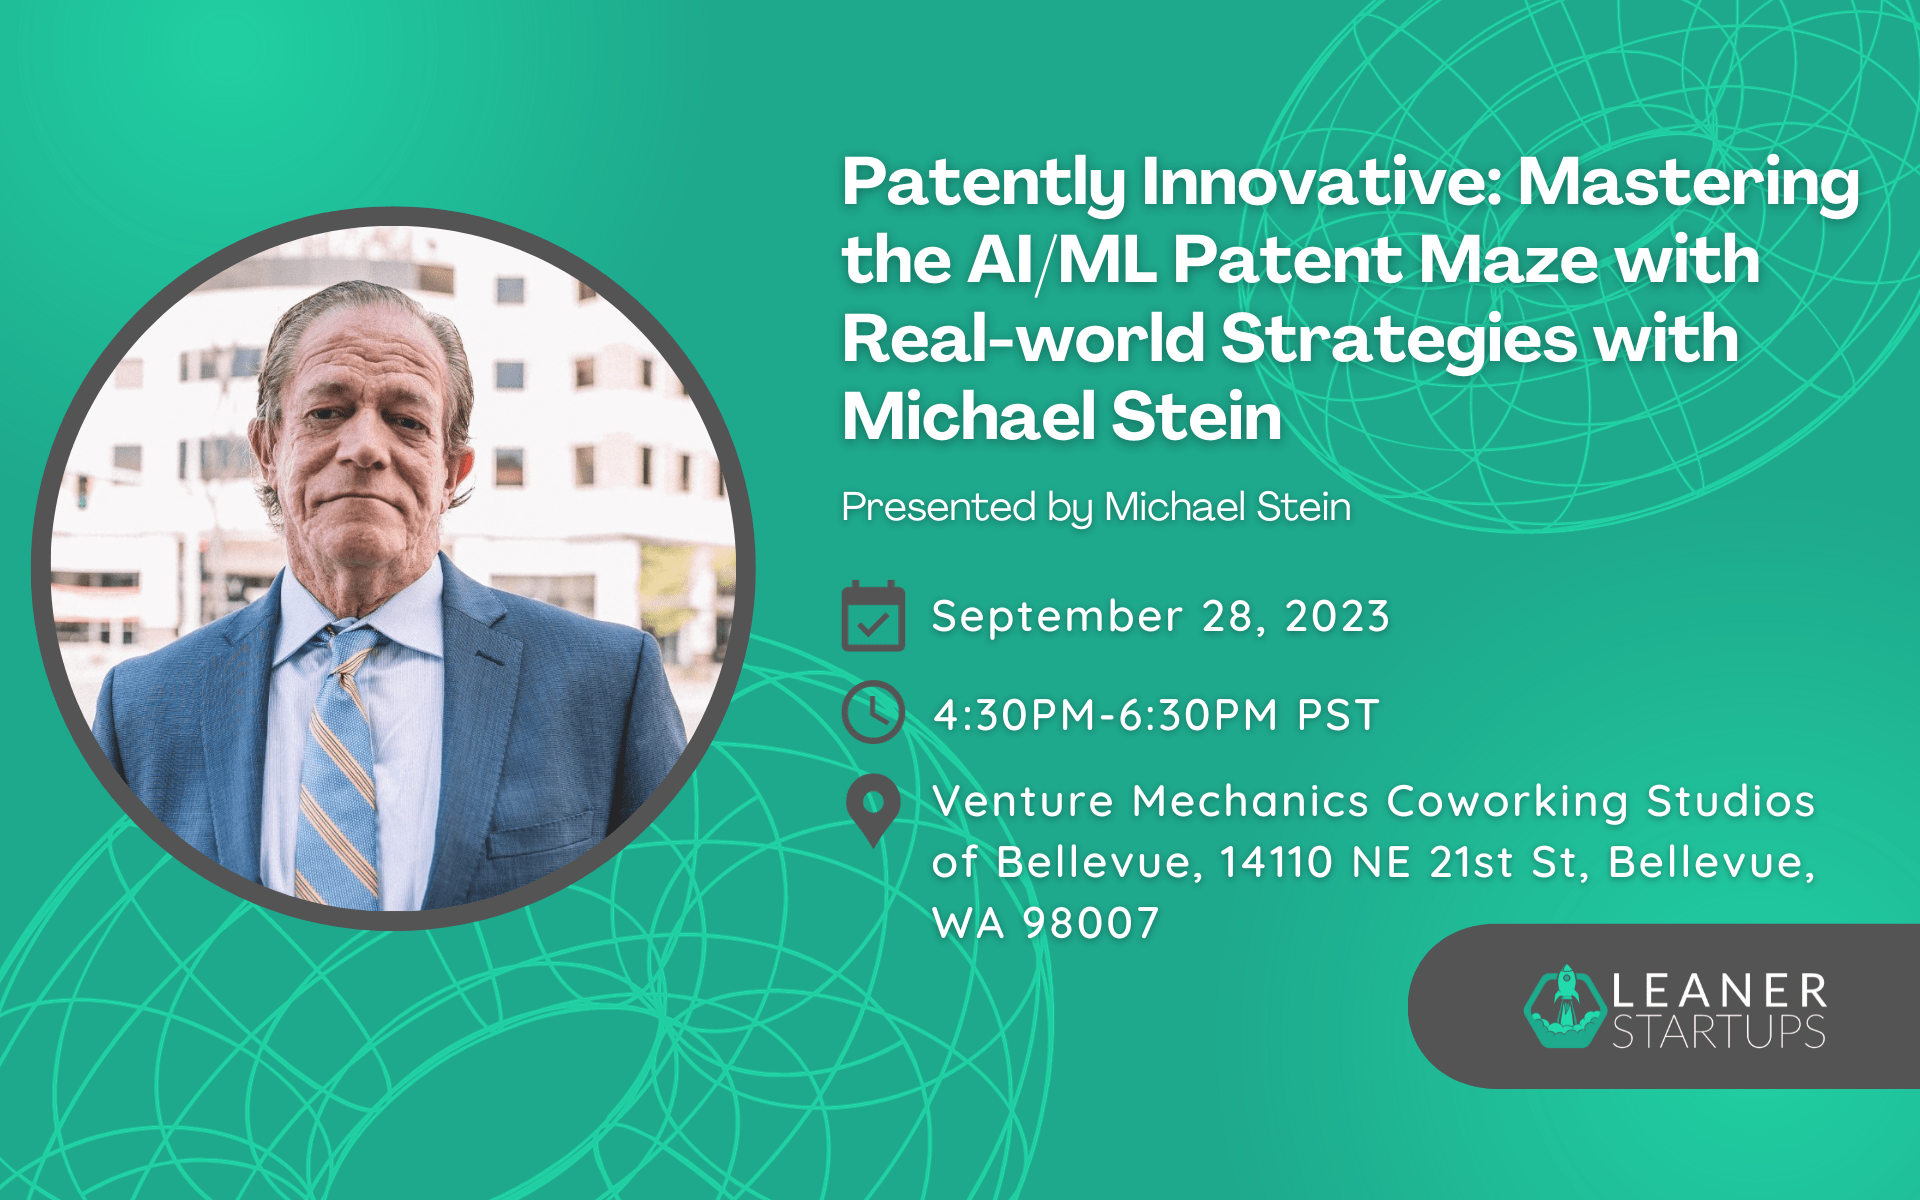 Leaner_Startups_Workshop_Patently_Innovative_Mastering_the_AIML_Patent_Maze_with_Real-world_Strategies_with_Michael_Stein.png